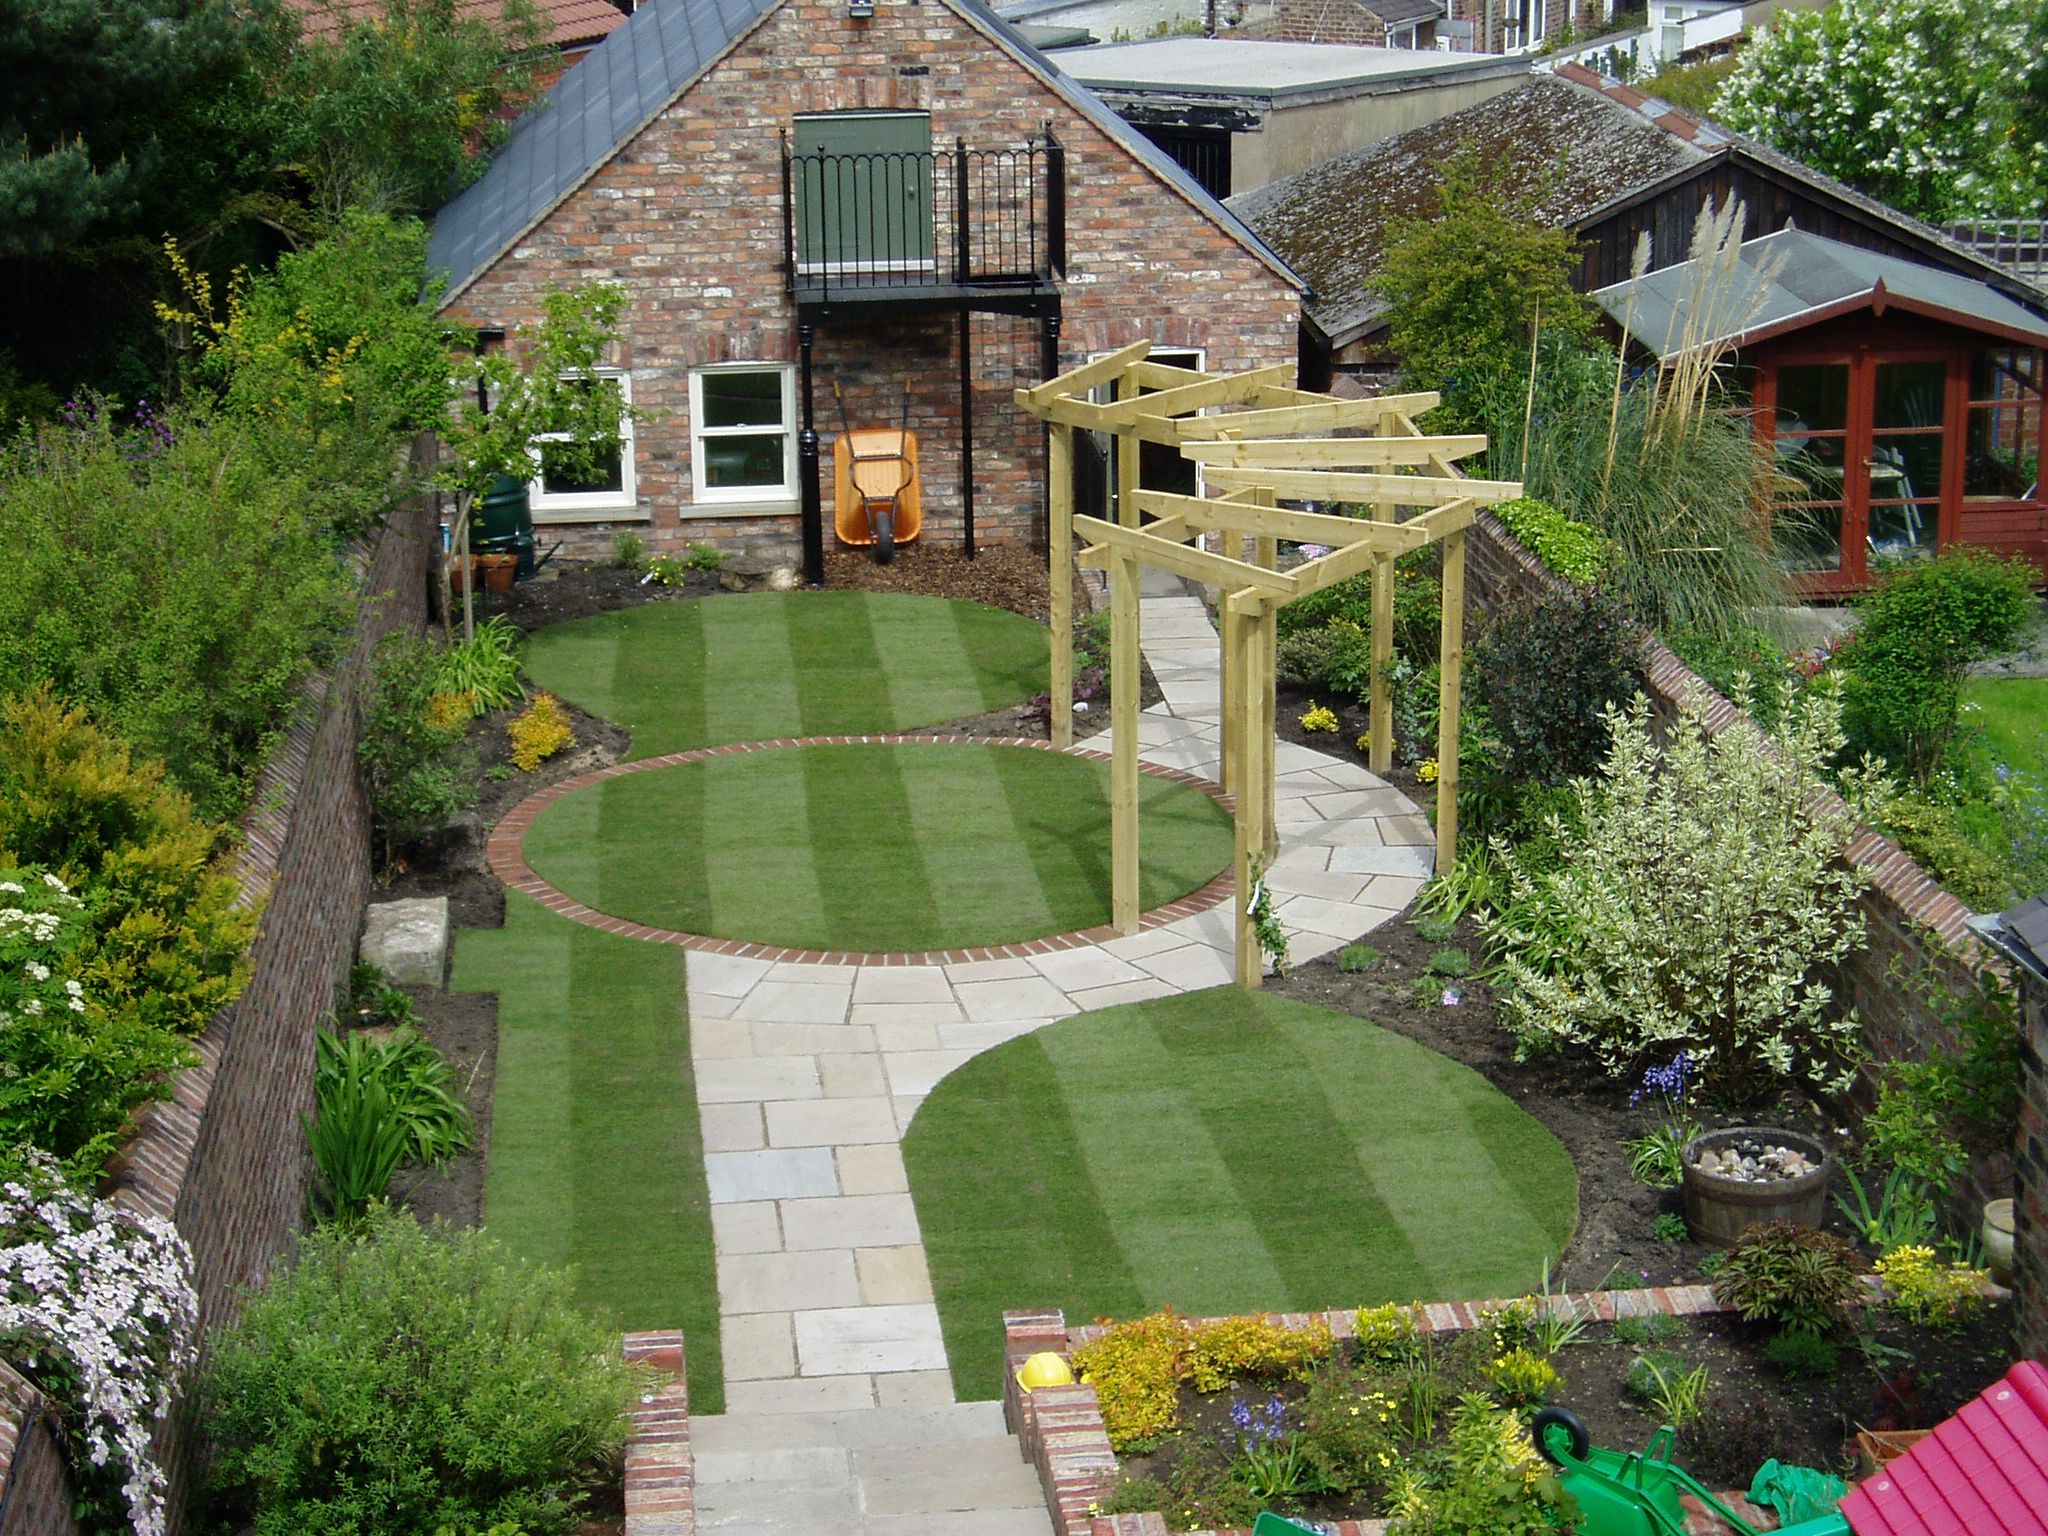 The ultimate place to have perfect home garden design